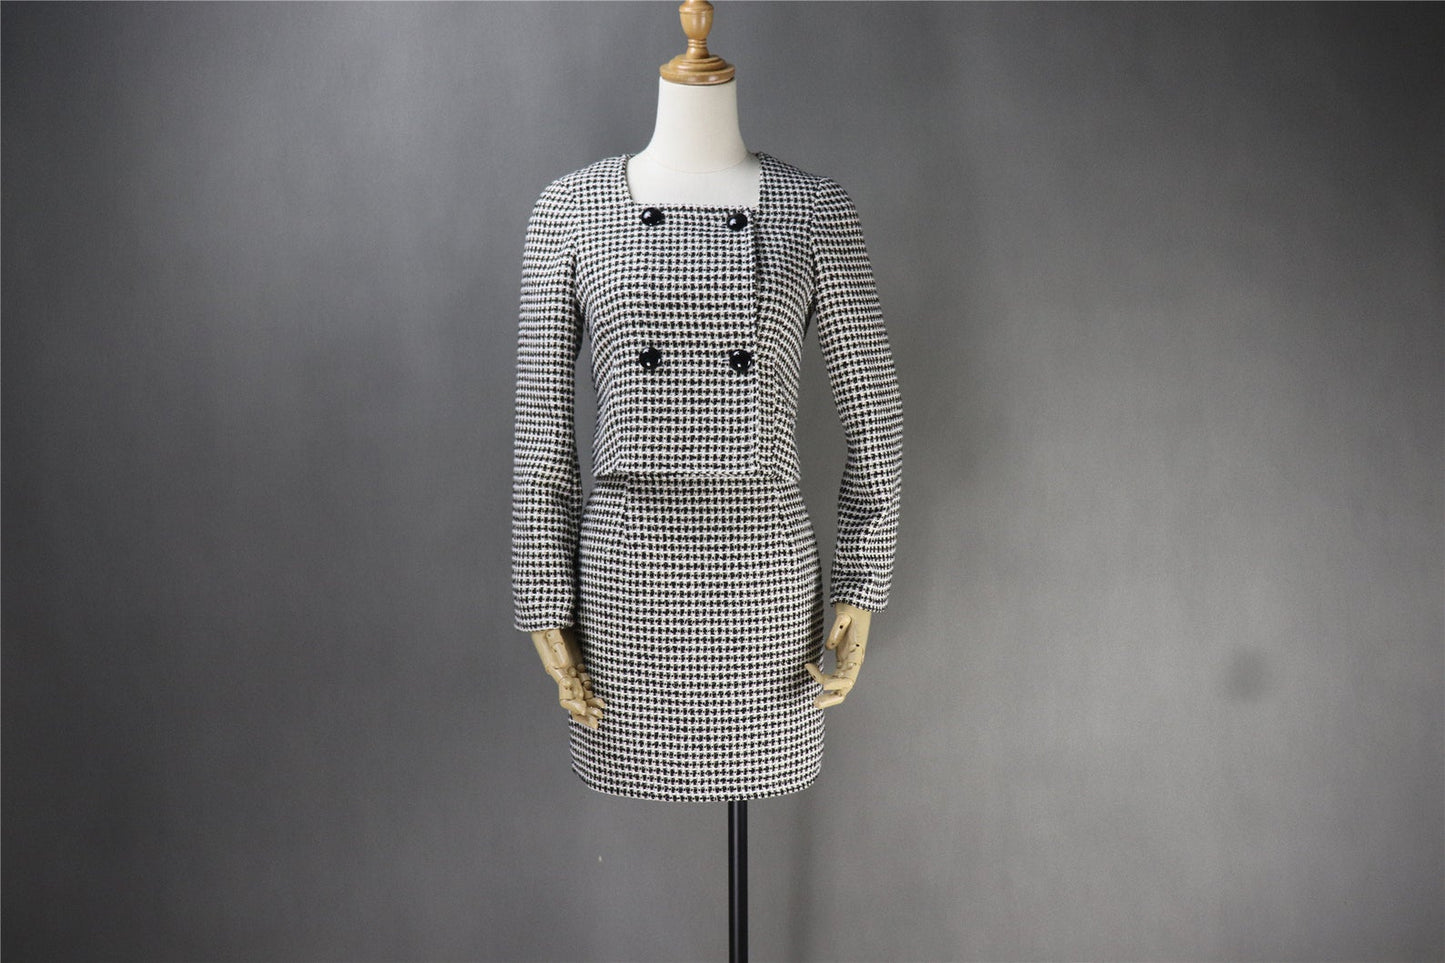 Custom Made Tweed Squire Neck Small Check Blazer + Skirt Suit